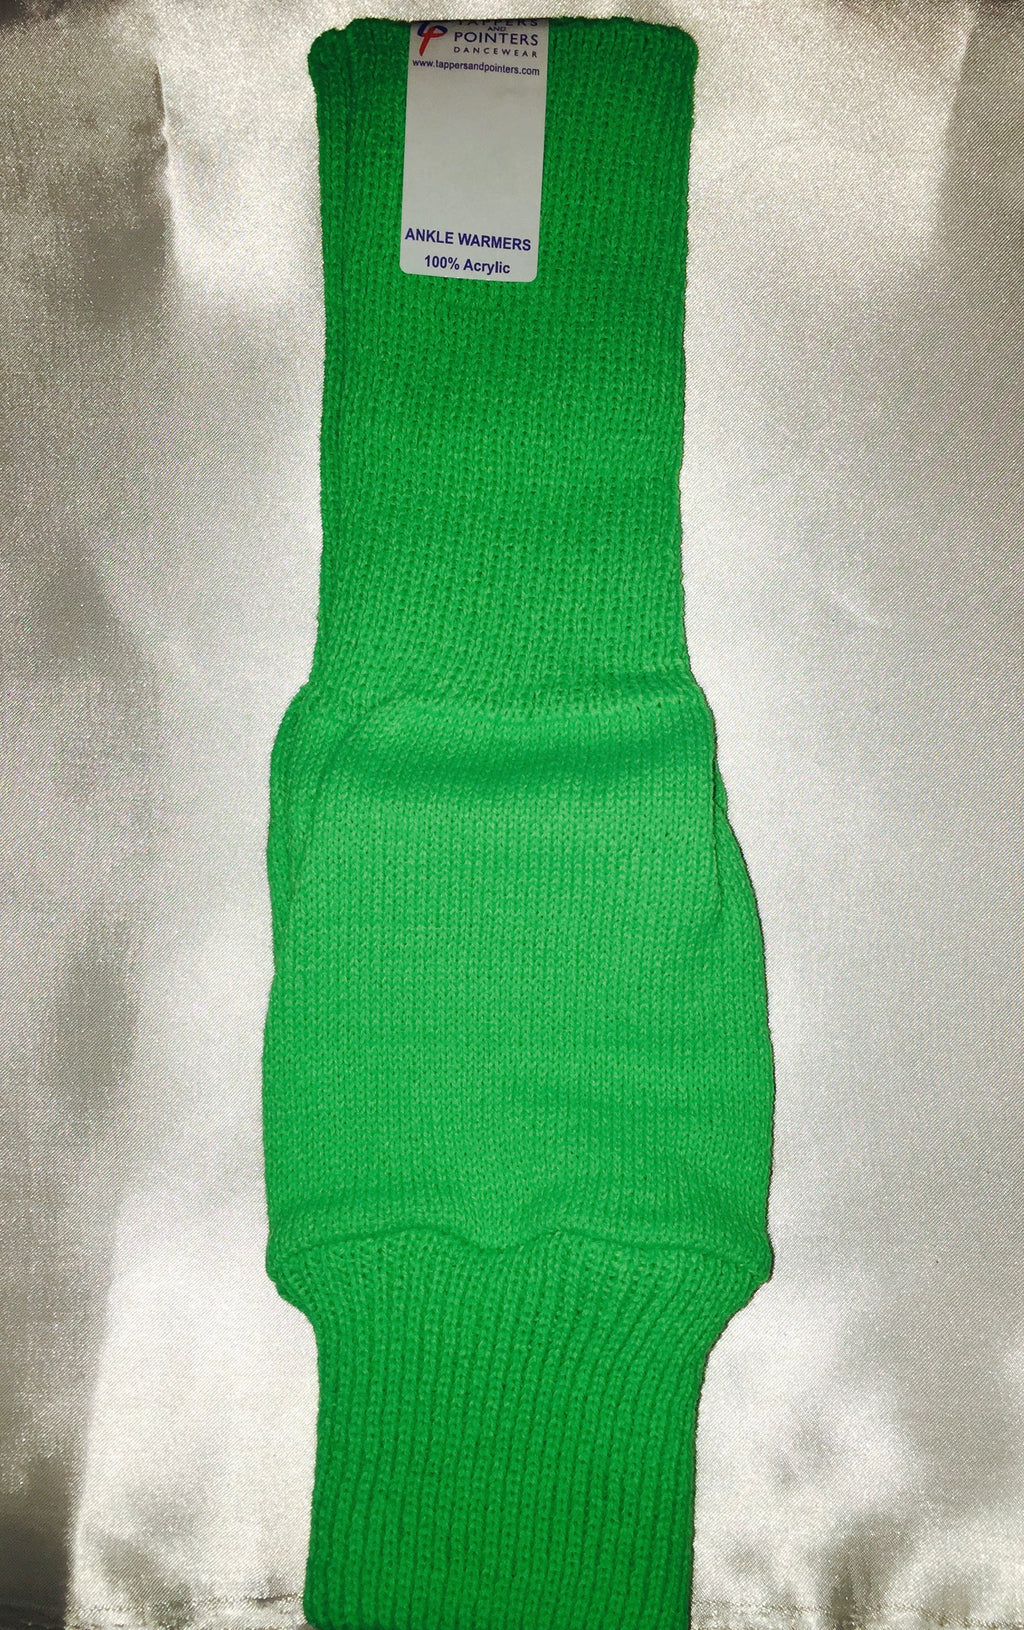 Ankle Warmers - Green (Adult)